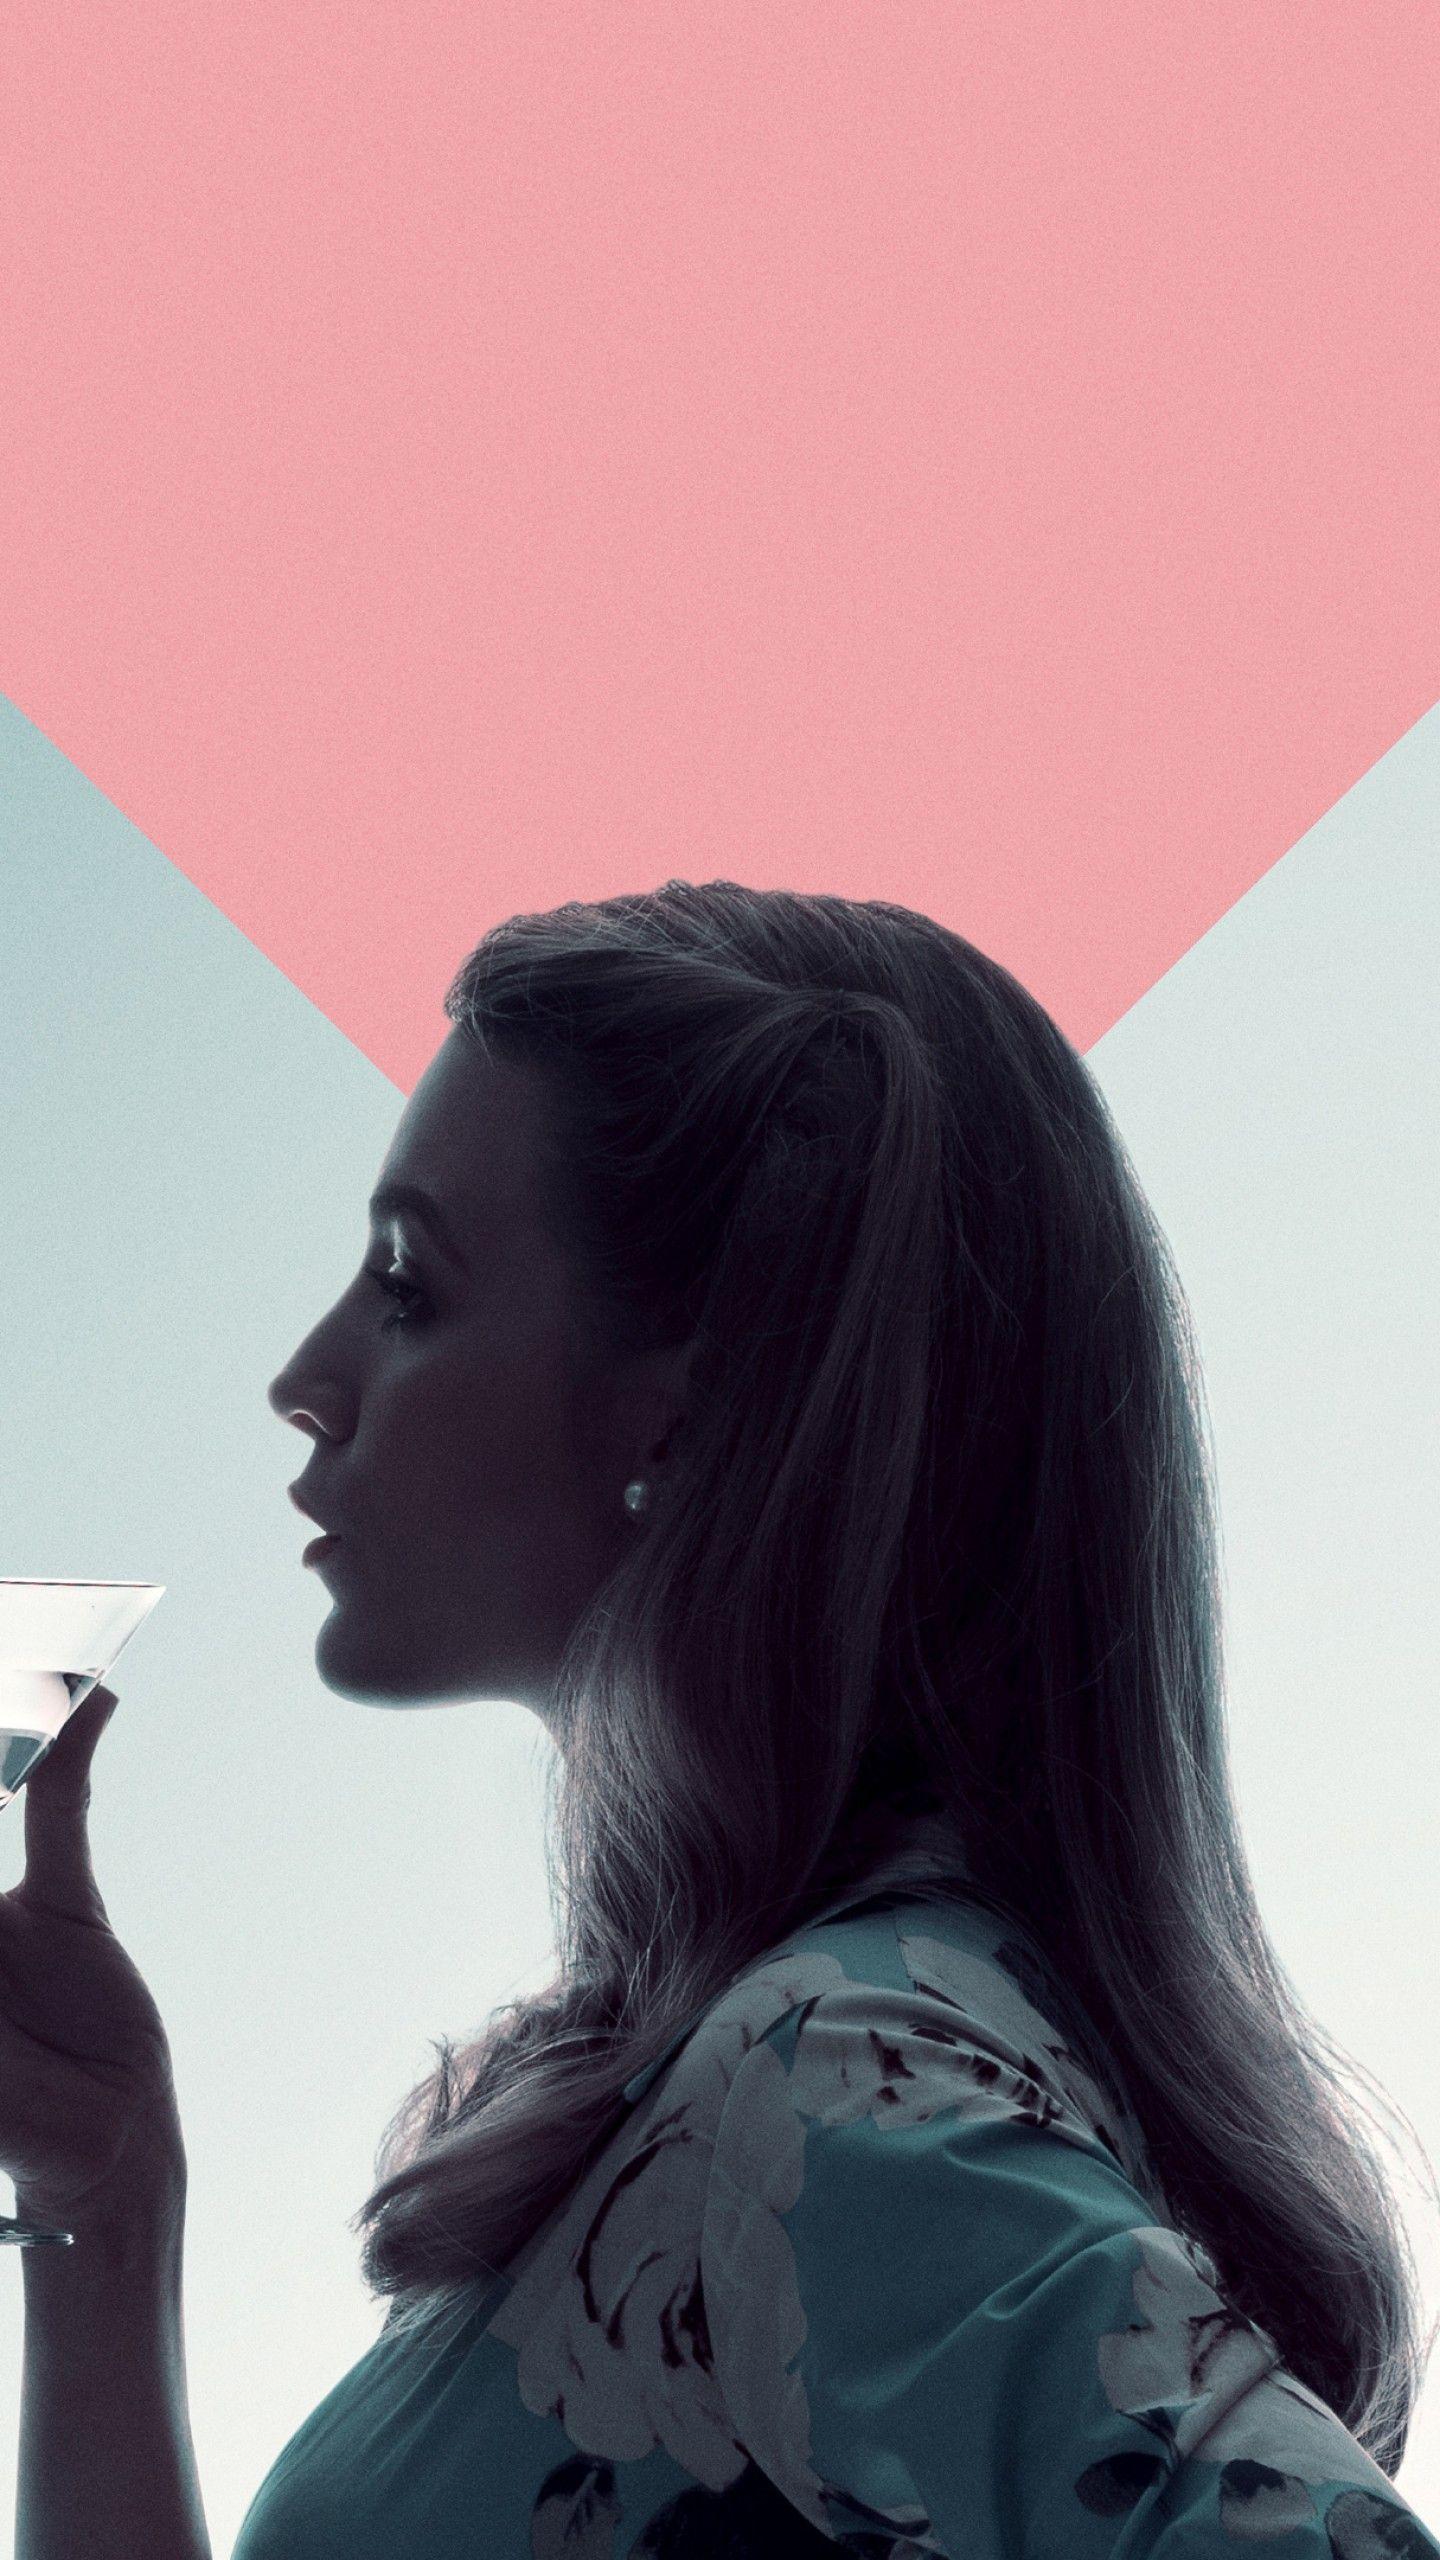 A Simple Favor 2018 Movie Poster Wallpapers